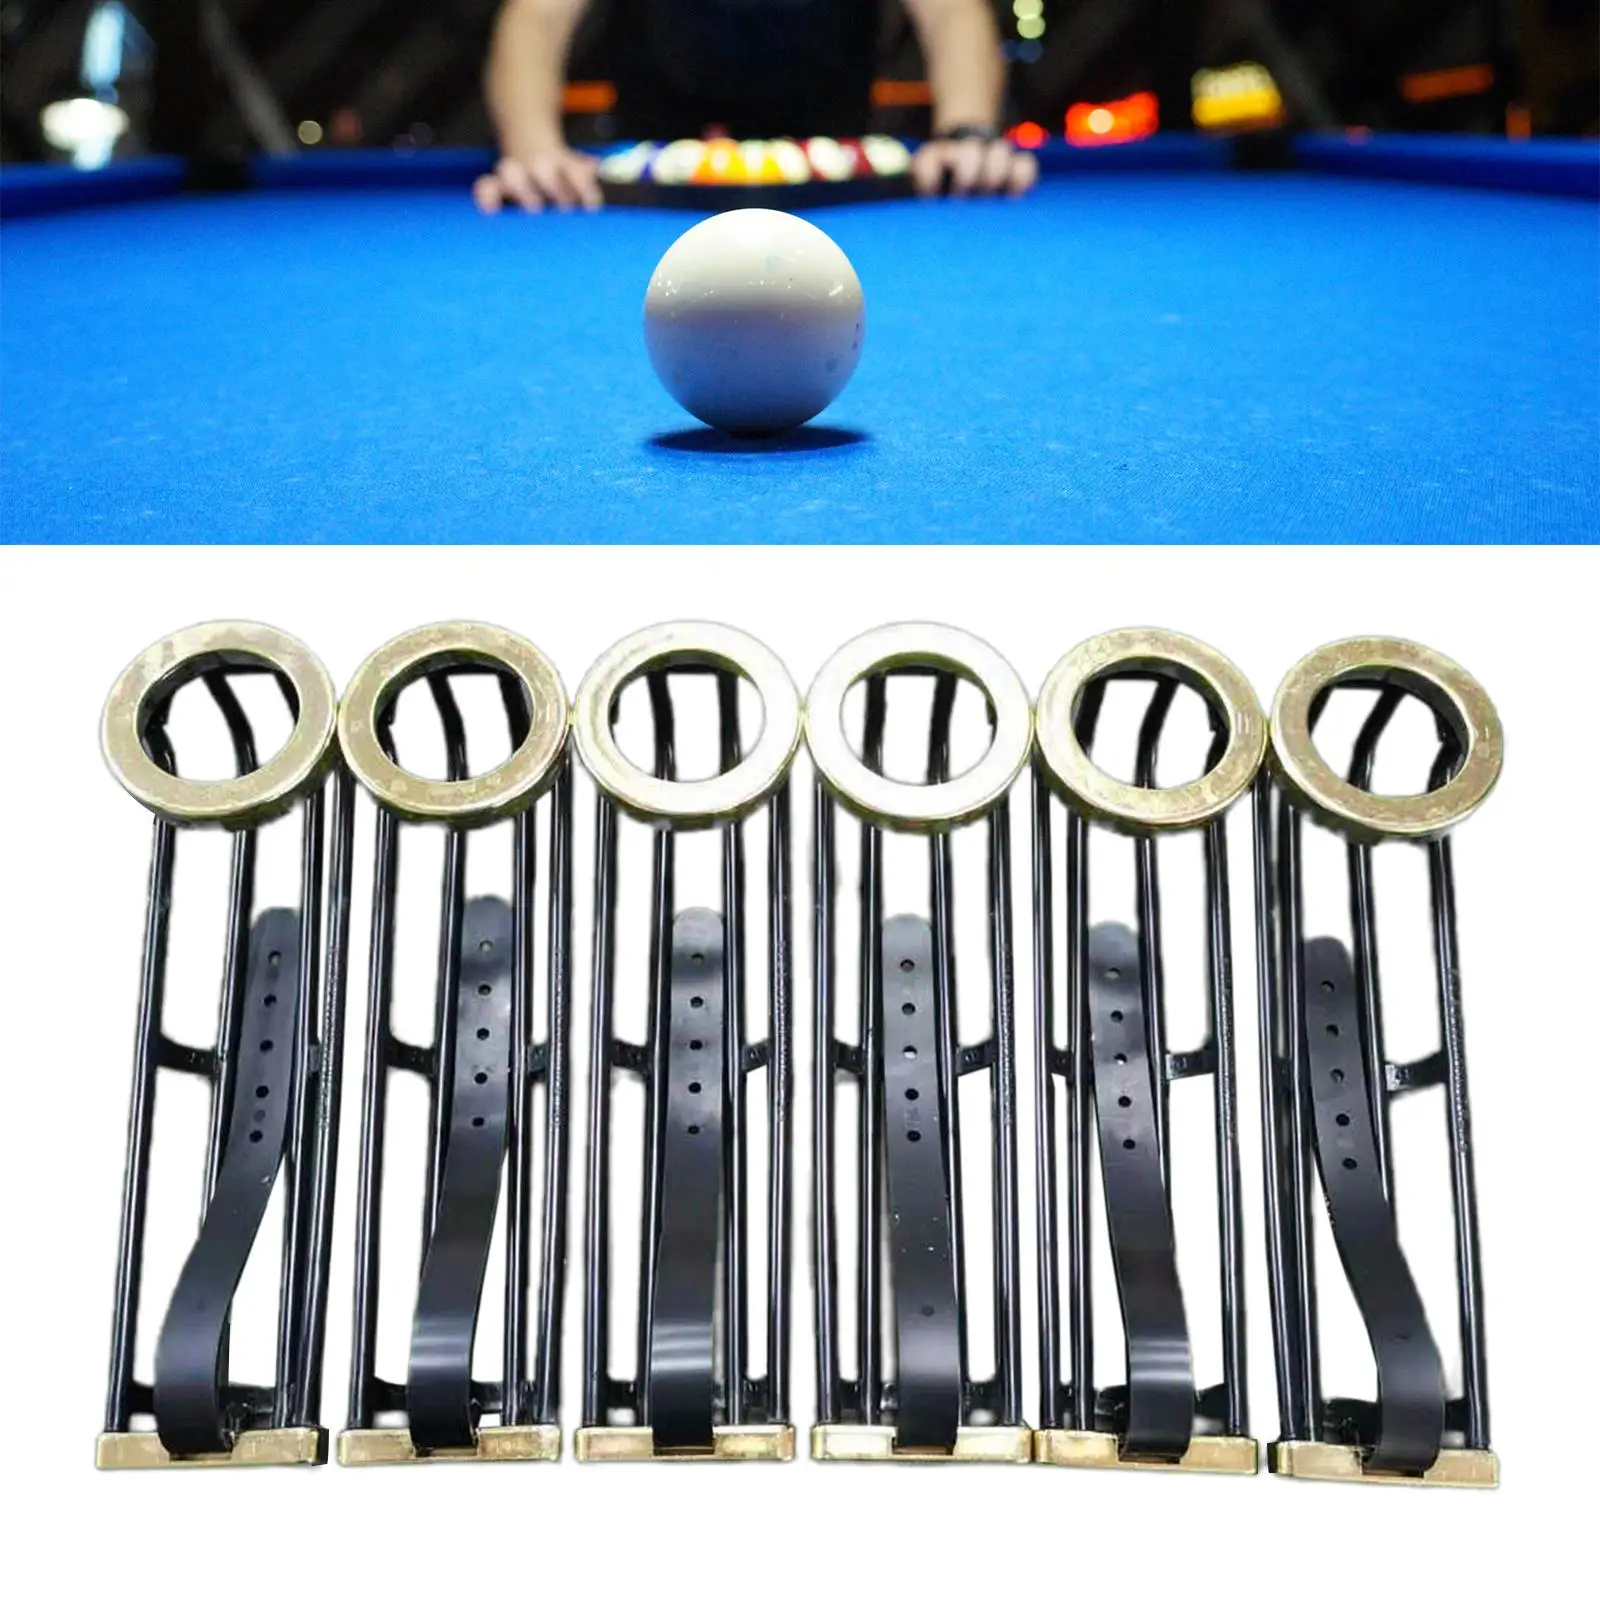 6x Billiards Table Pocket Rail Parts Entertainment American Pool Table Accessories Lightweight Durable Portable Snooker Pockets